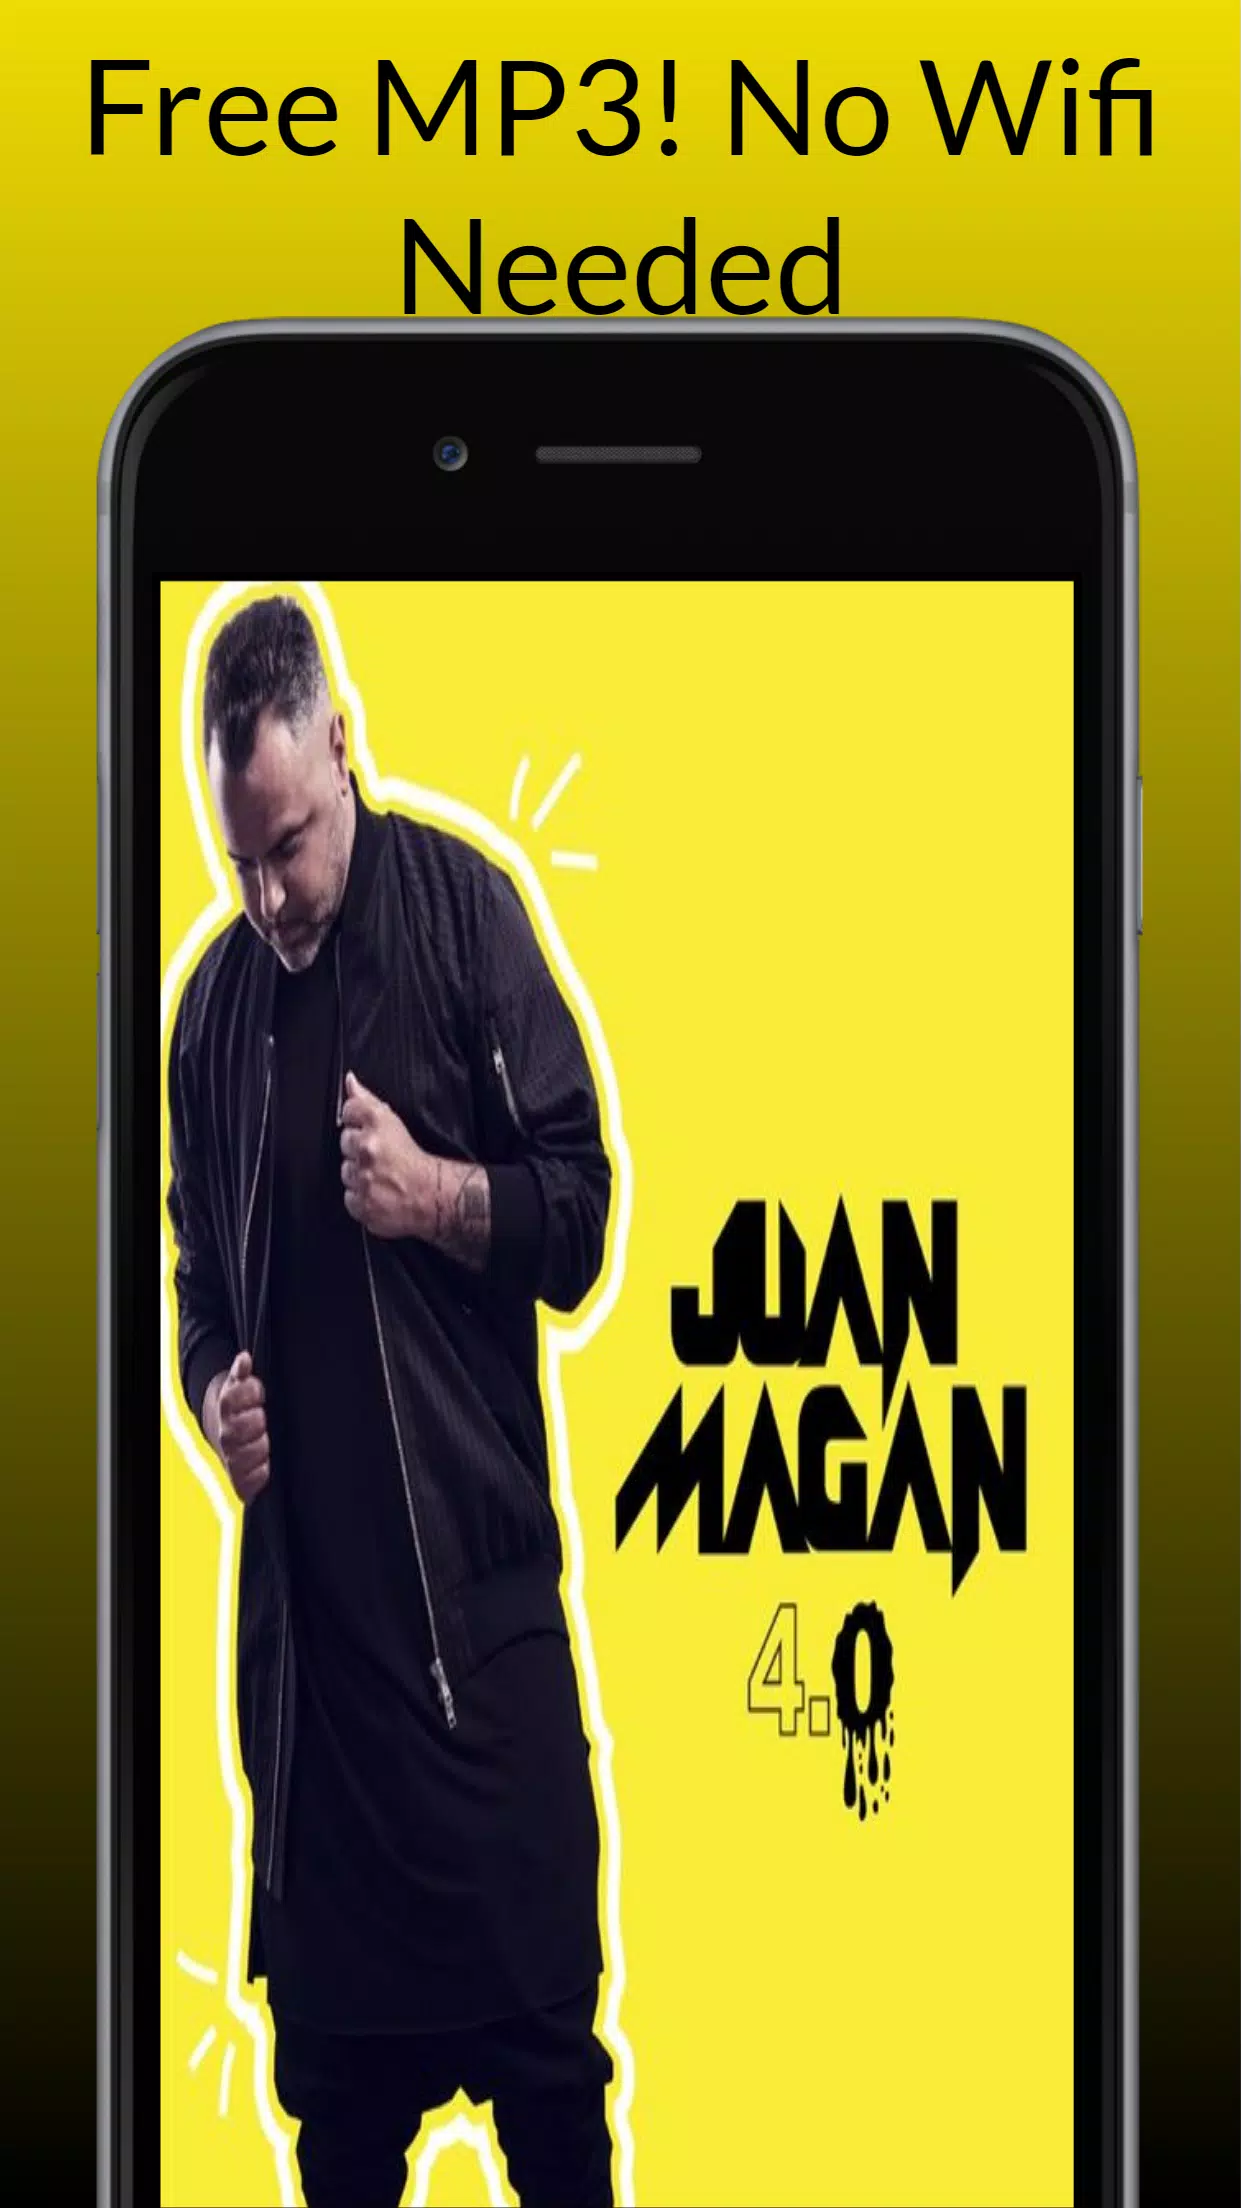 Juan Magan Songs MP3 Music Download Without Wifi APK for Android Download